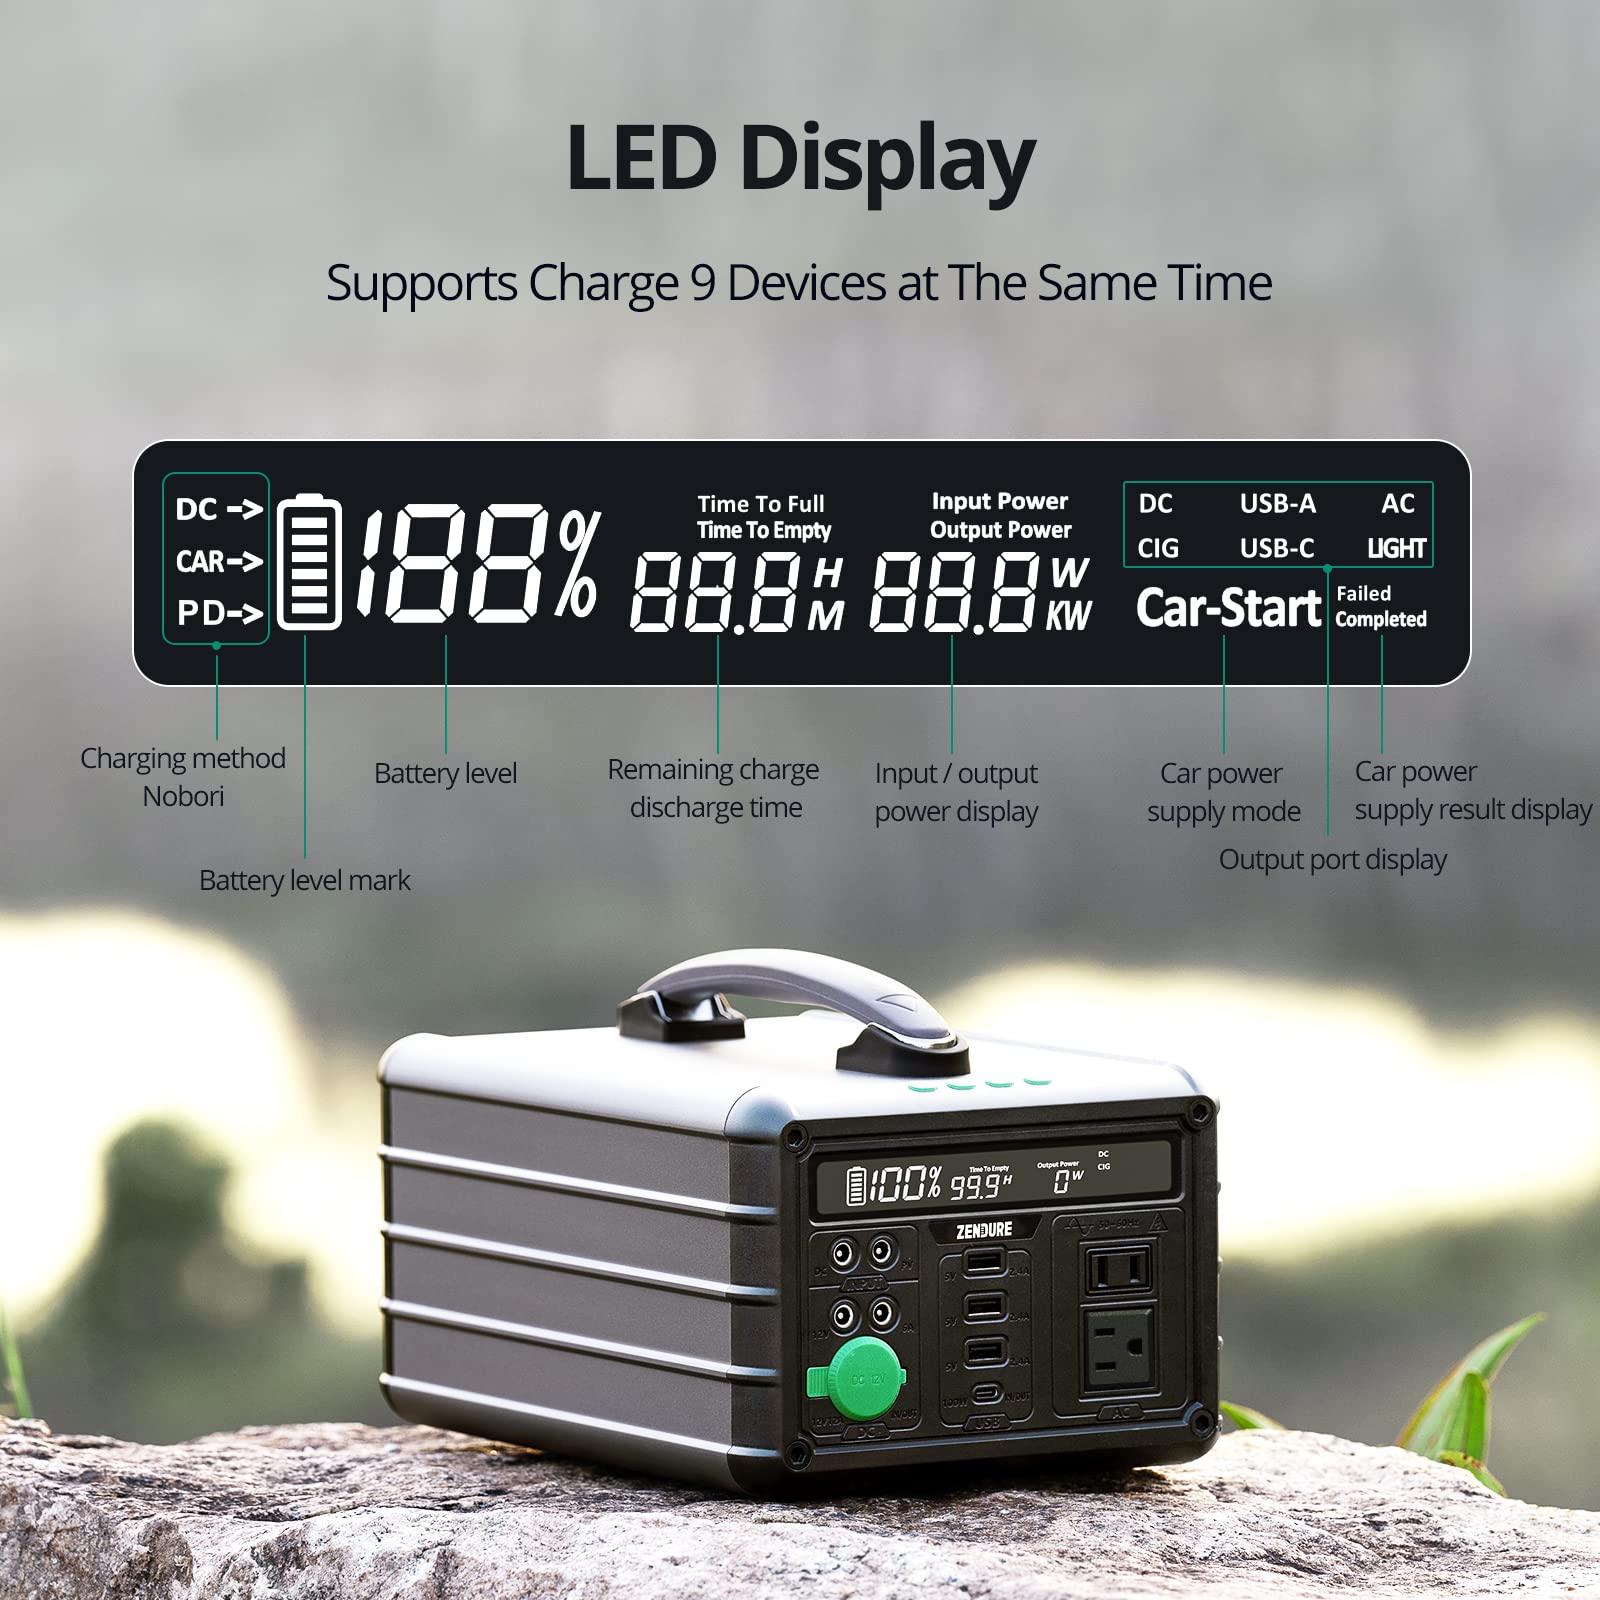 Zendure 607Wh Portable Power Station 600W AC output, Small,Lightweight, Quiet with LED SOS Light, Power Supply 9 Output Backup Battery for Emergency, Disaster Prevention, Home,Camping, Outdoors SB600M